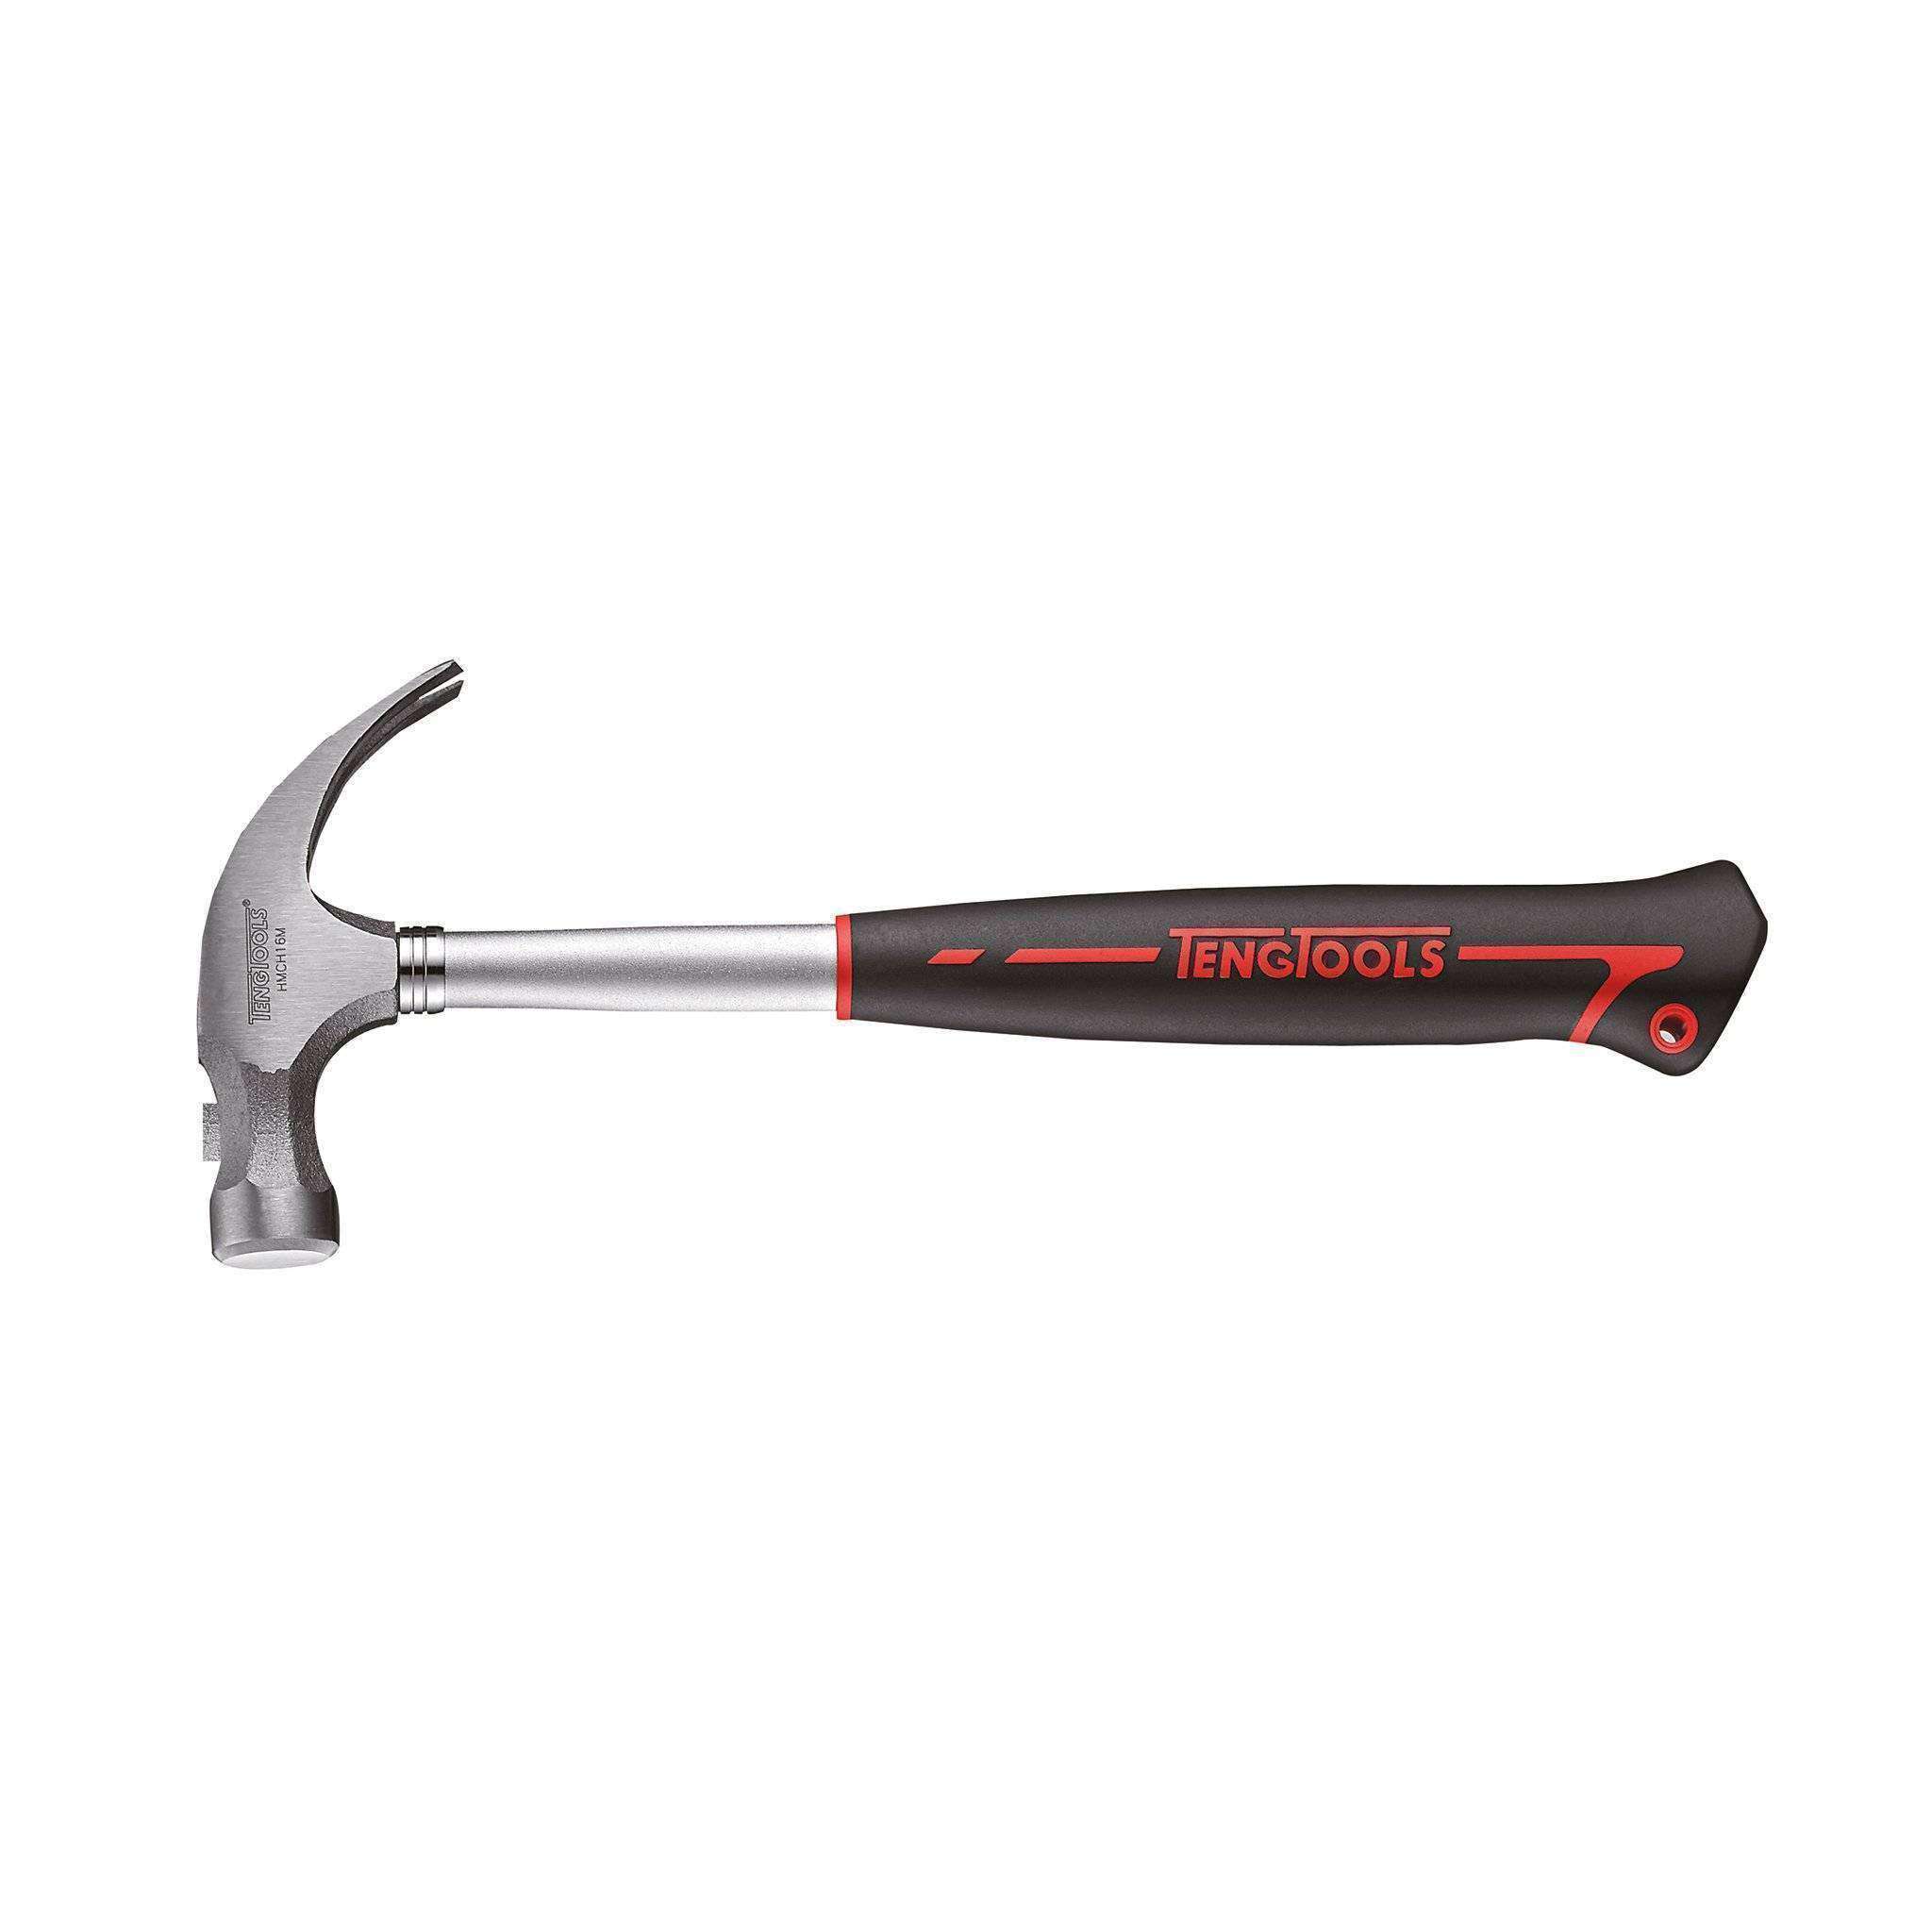 Teng Tools Claw Hammer Range with Polished Steel Heads